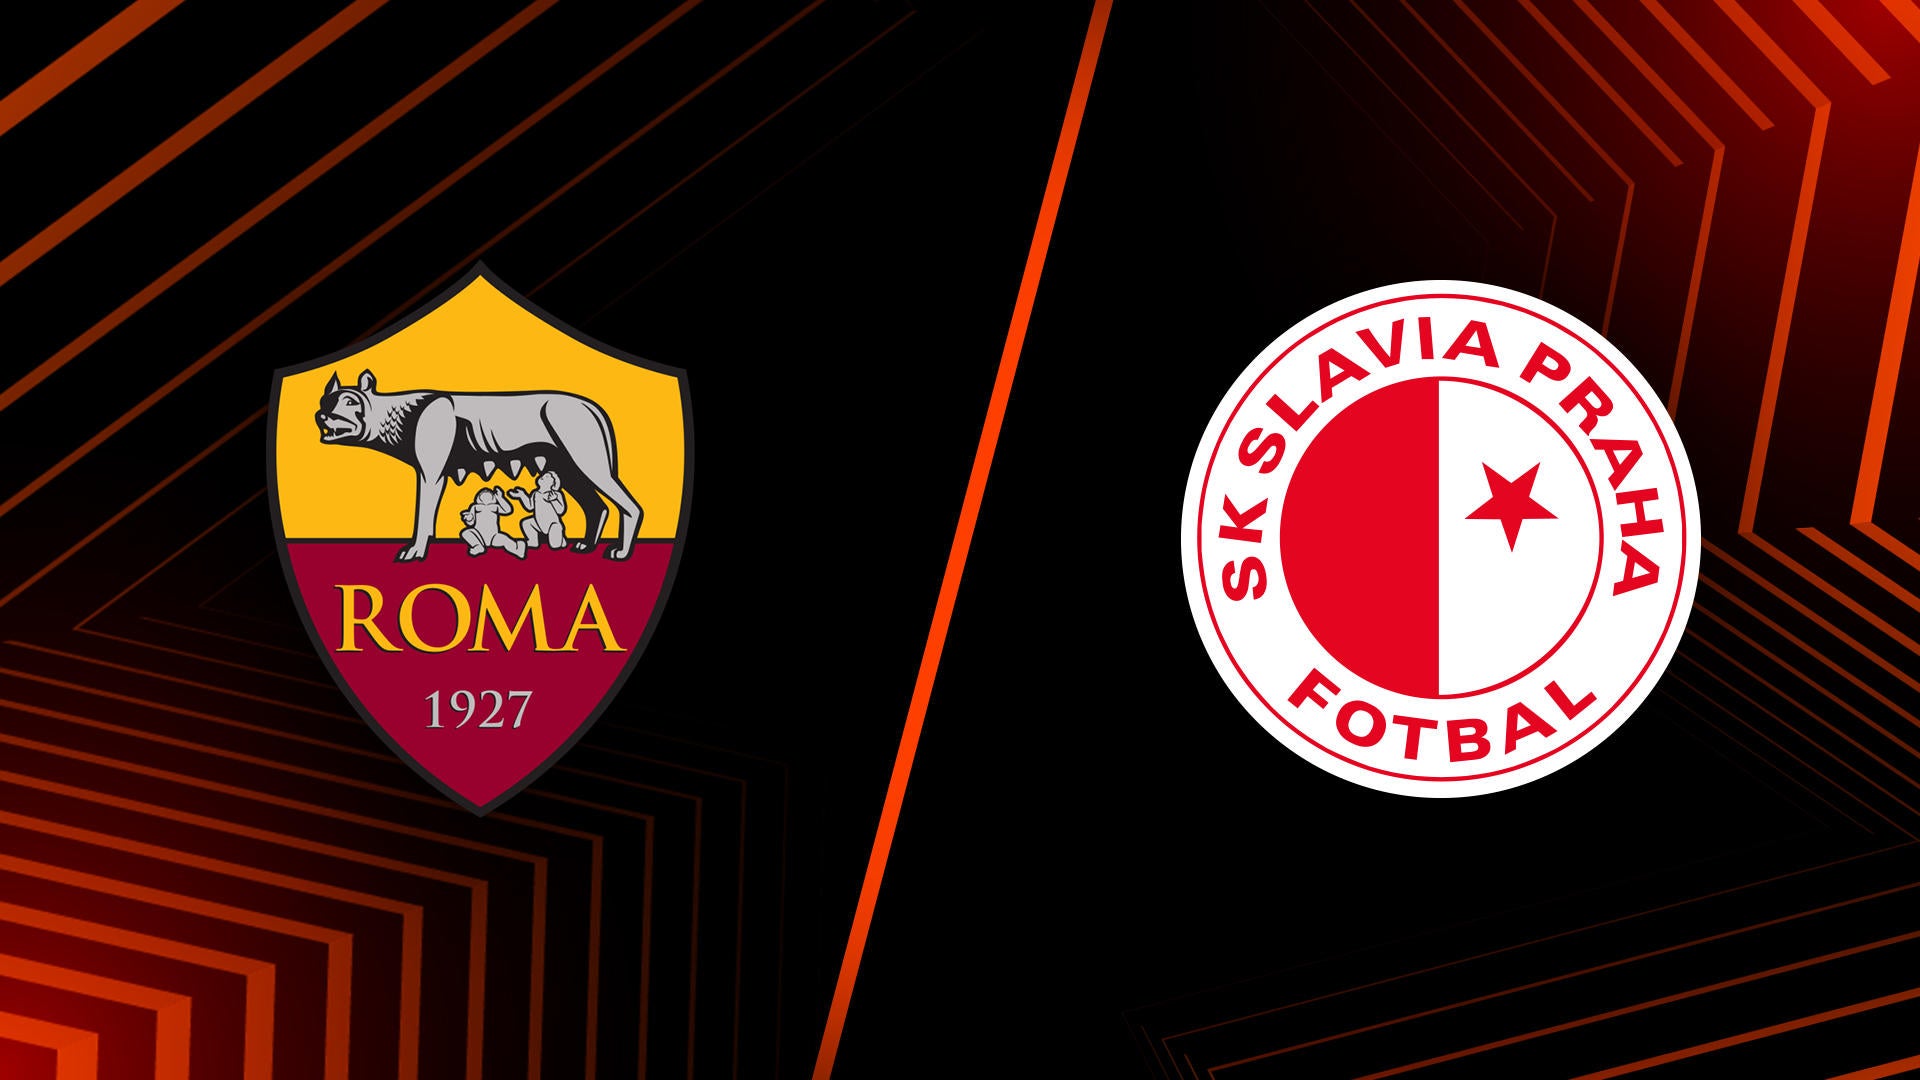 AS Roma English on X: SK Slavia Prague are the first opponents to